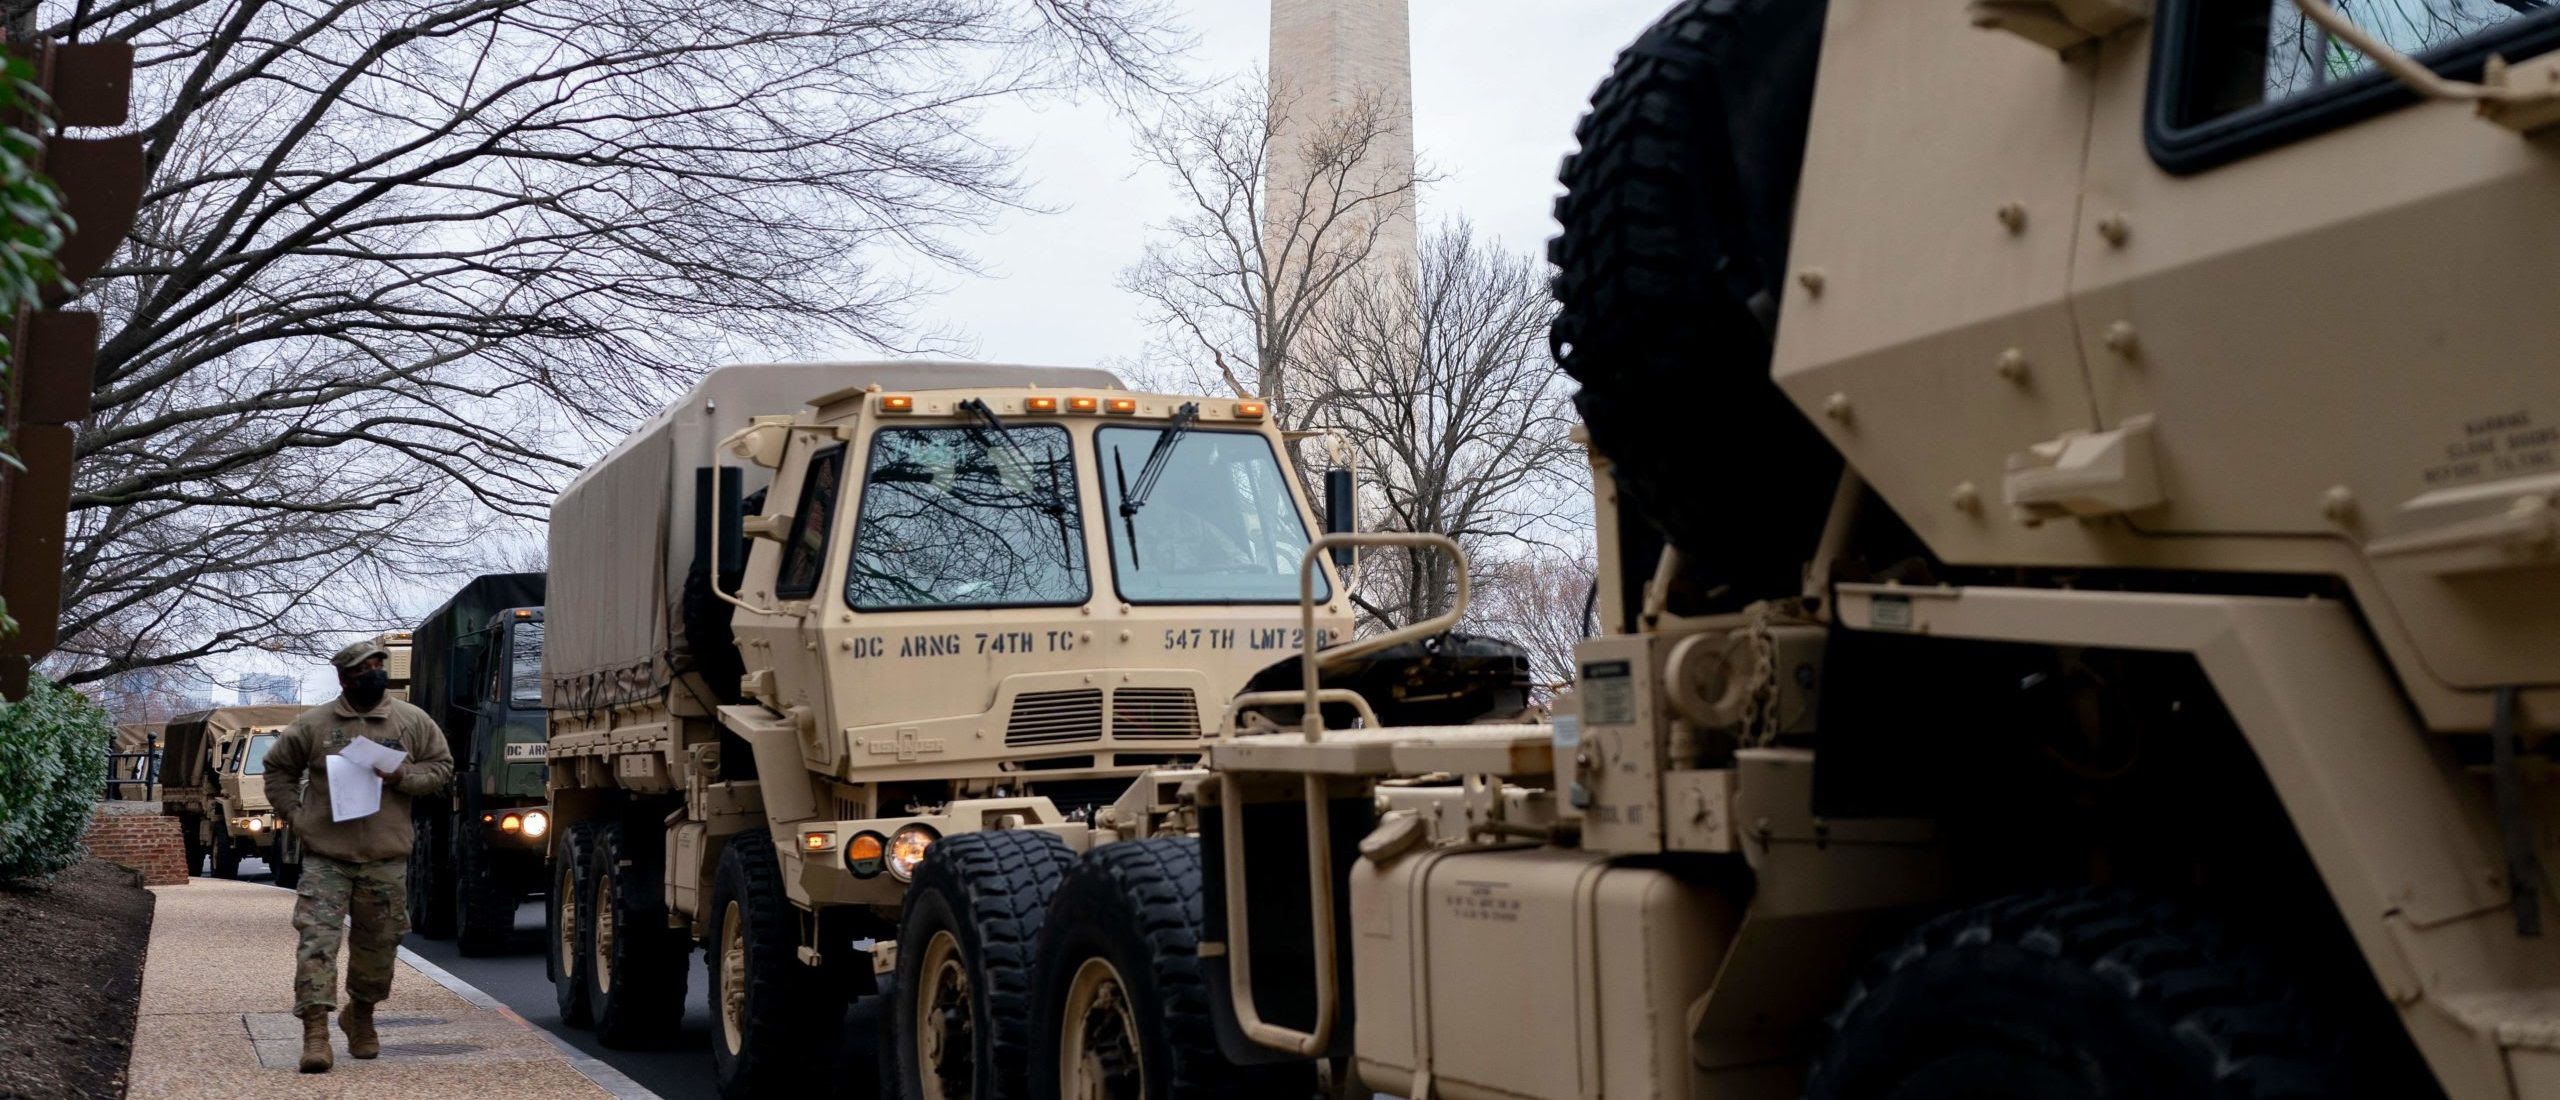 DC Police Keep Blocking Off Access To Nation’s Capital Without Justification